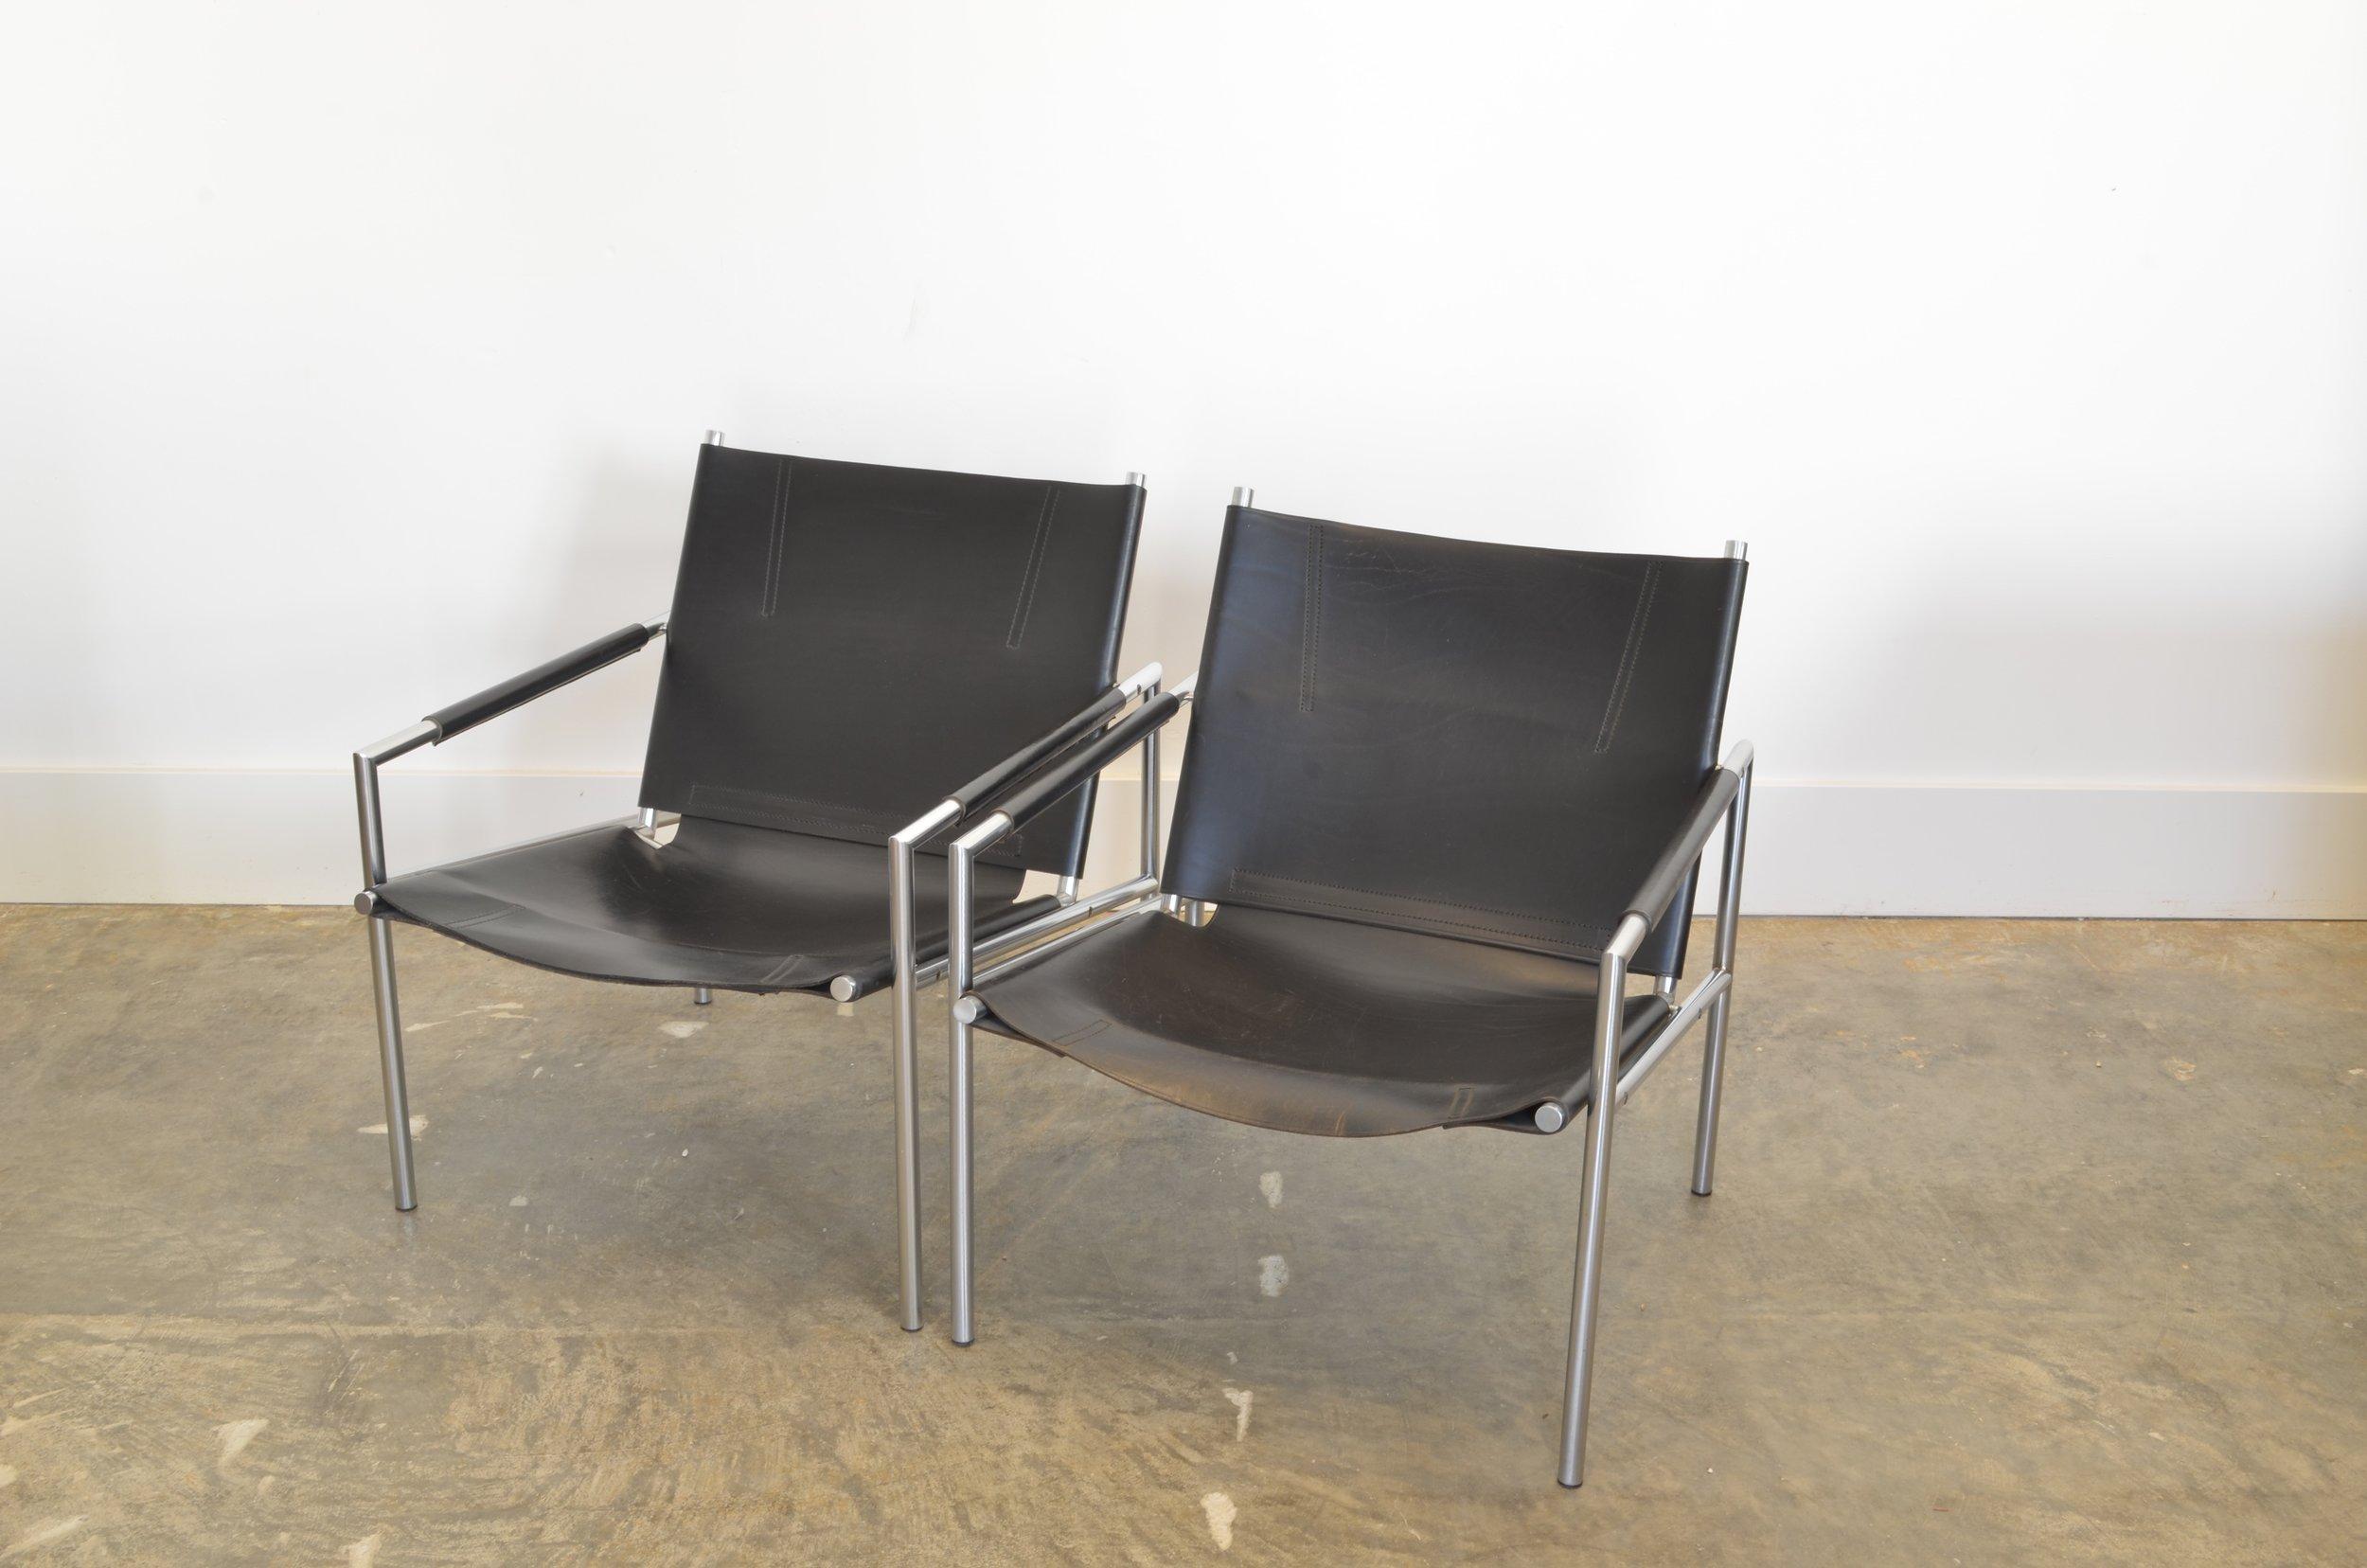 20th Century Pair of Black Leather and Chrome Martin Visser Lounge Chairs, Model SZ02 1965 For Sale